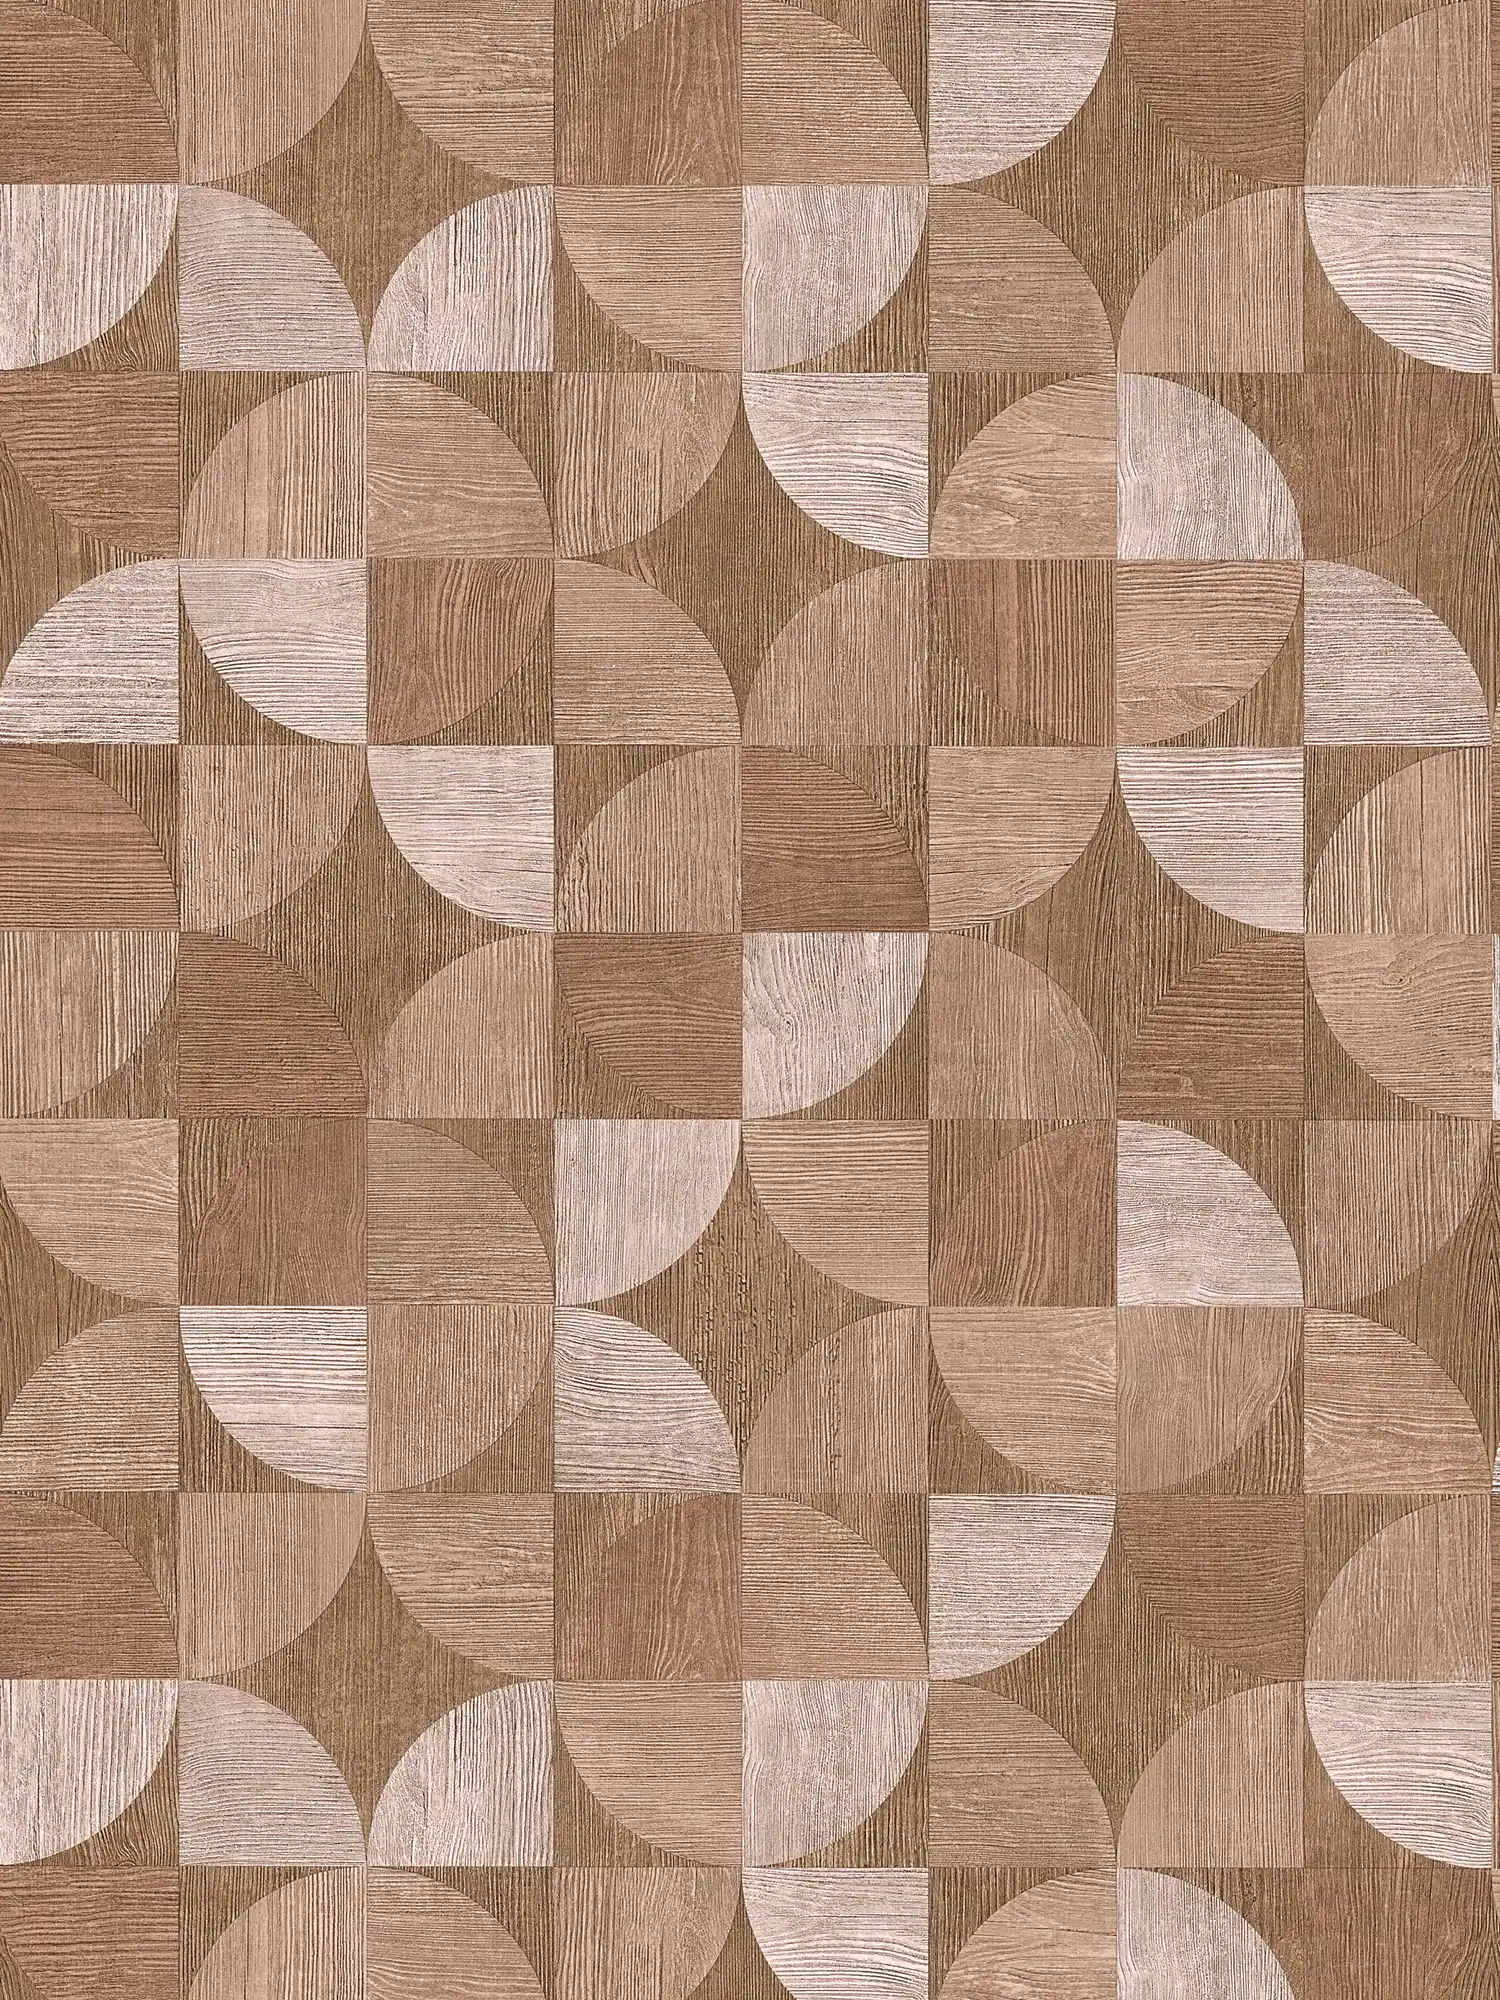 Wallpaper with graphic pattern in wood look - brown, beige
